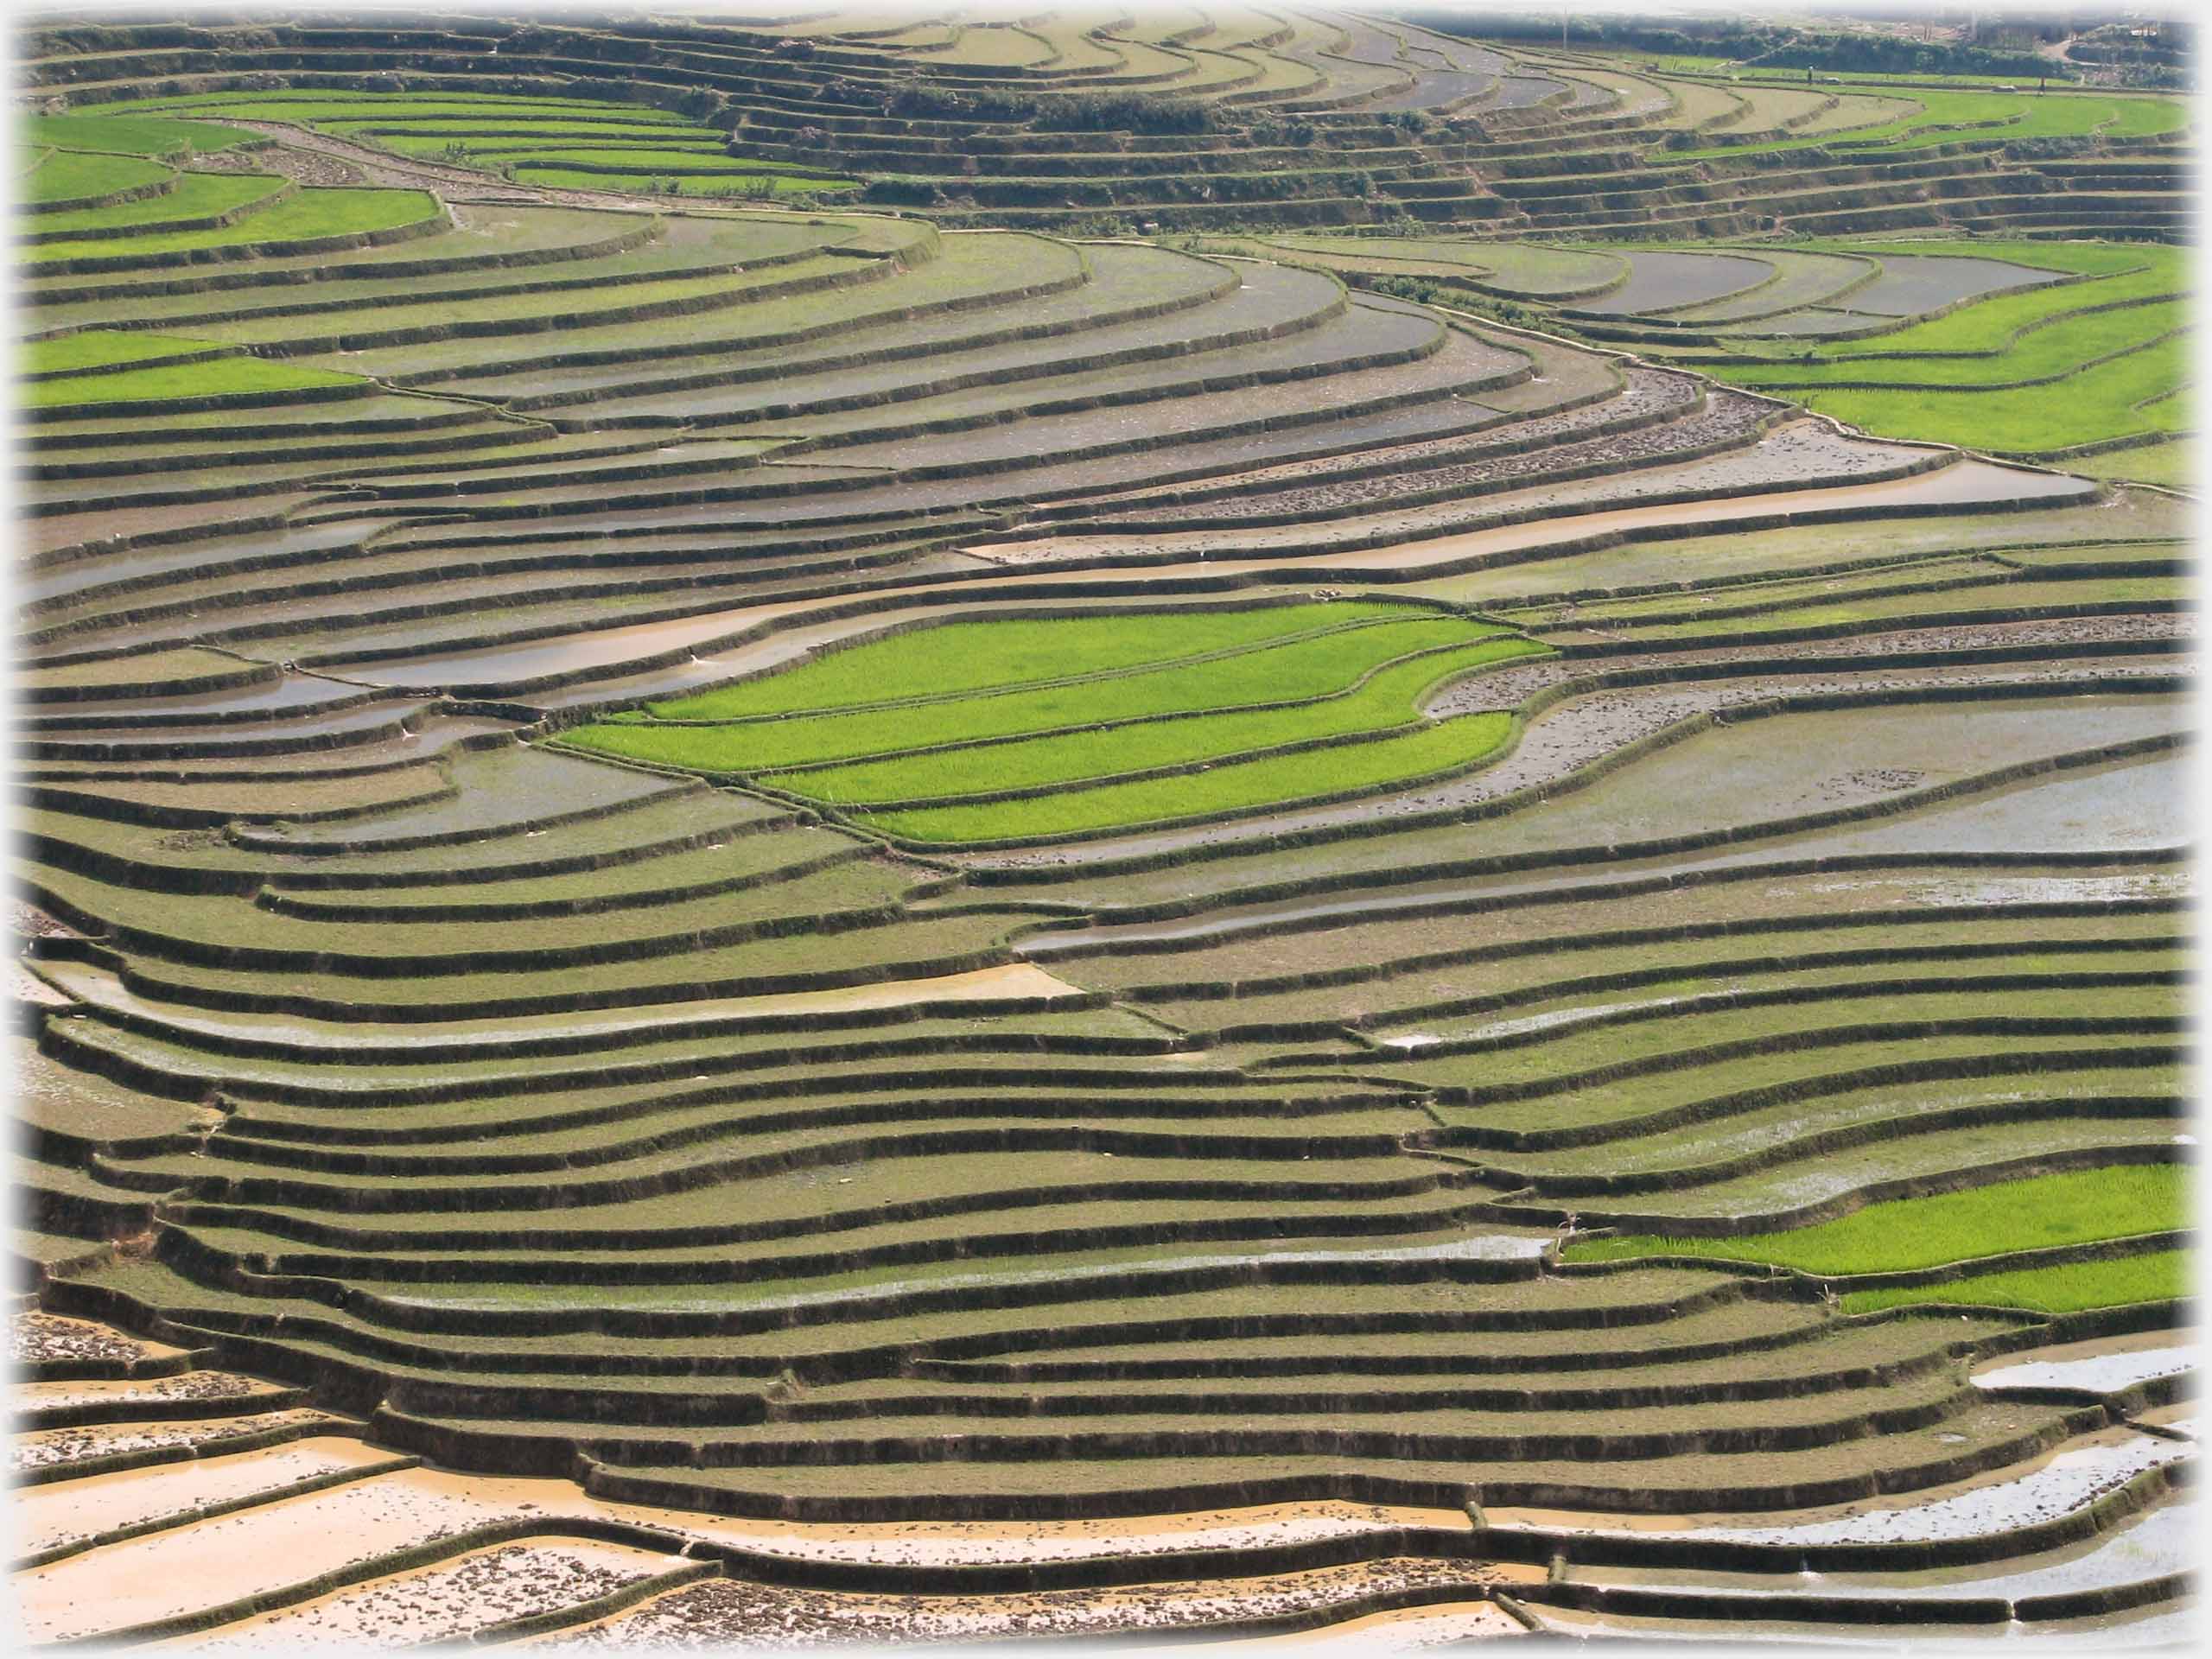 Scores of terraced fields showing first signs of green.